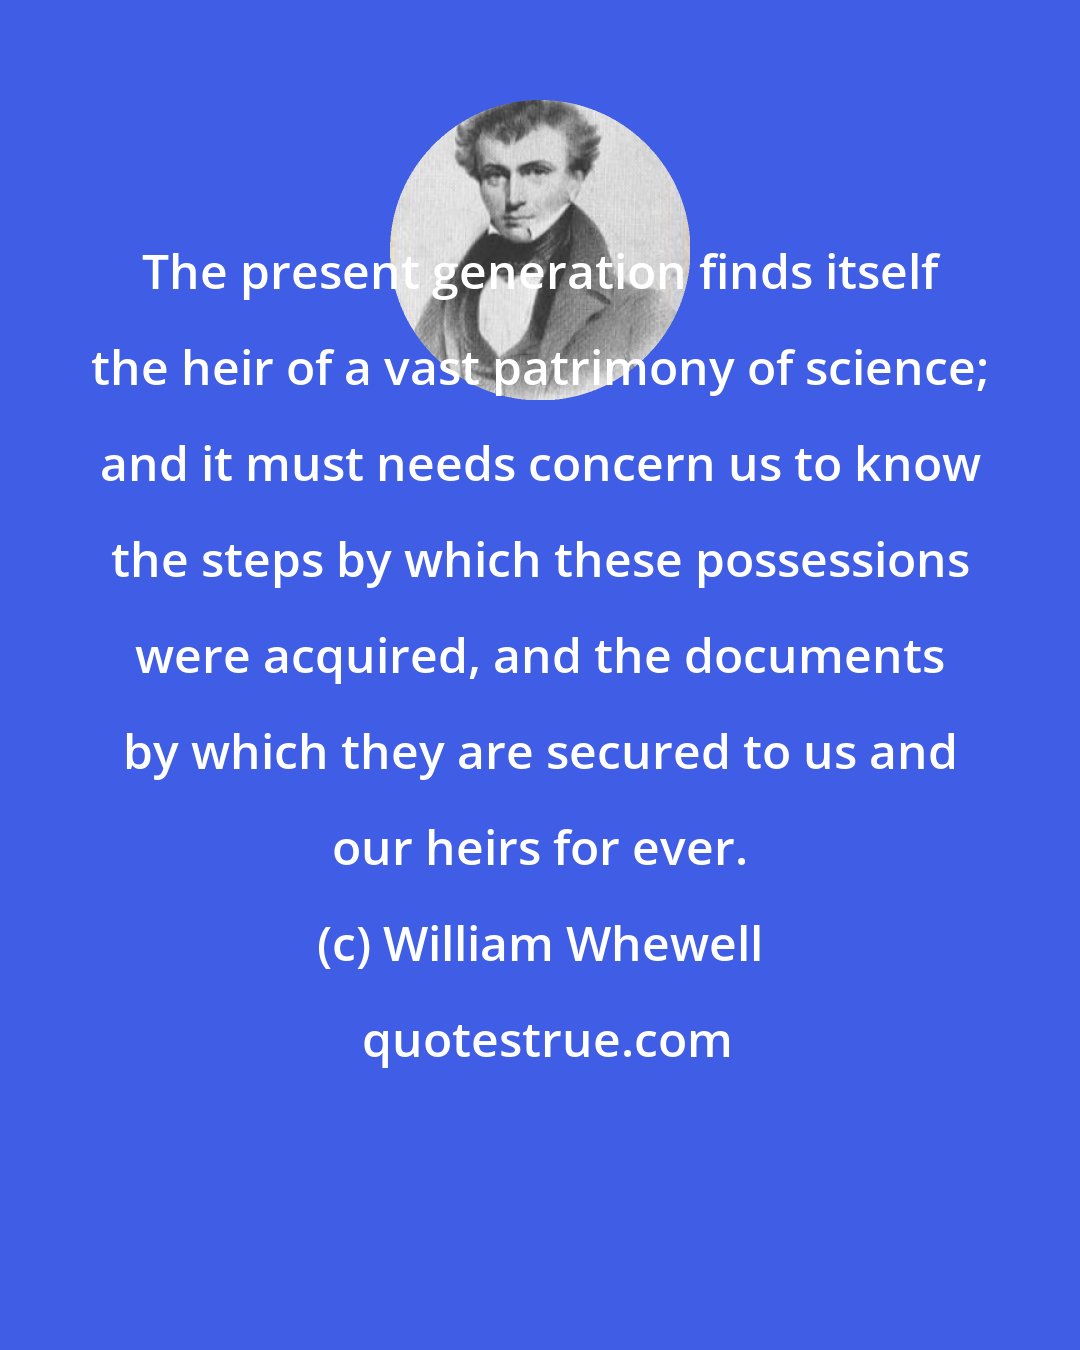 William Whewell: The present generation finds itself the heir of a vast patrimony of science; and it must needs concern us to know the steps by which these possessions were acquired, and the documents by which they are secured to us and our heirs for ever.